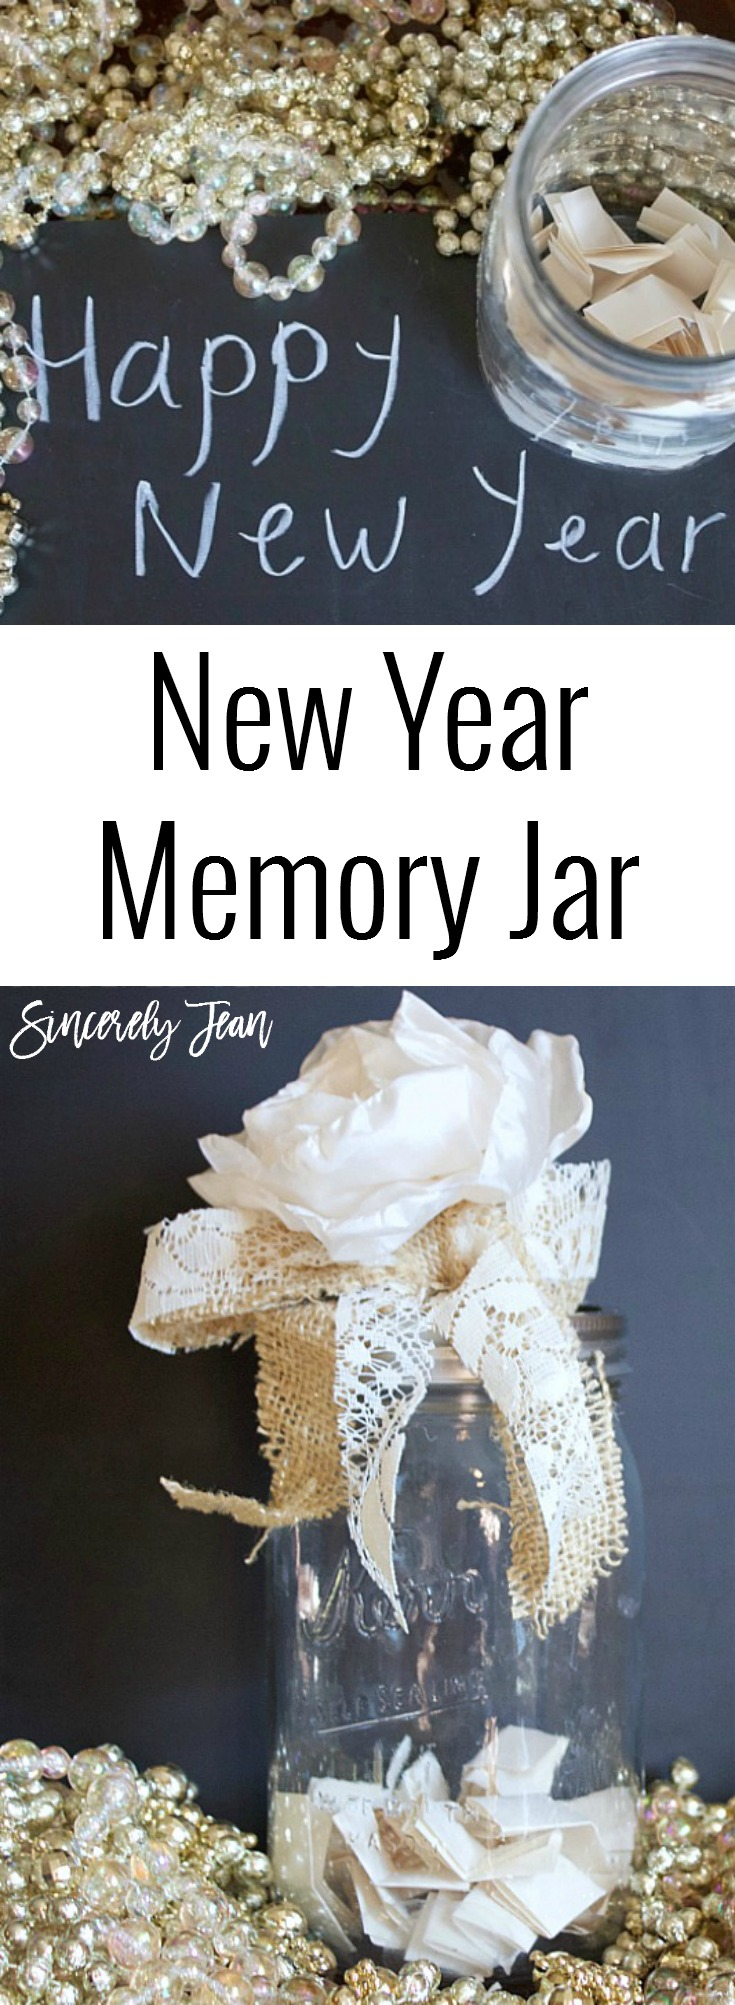 New Year Memory Jar - save all your great memories throughout the new year! | www.SincerelyJean.com